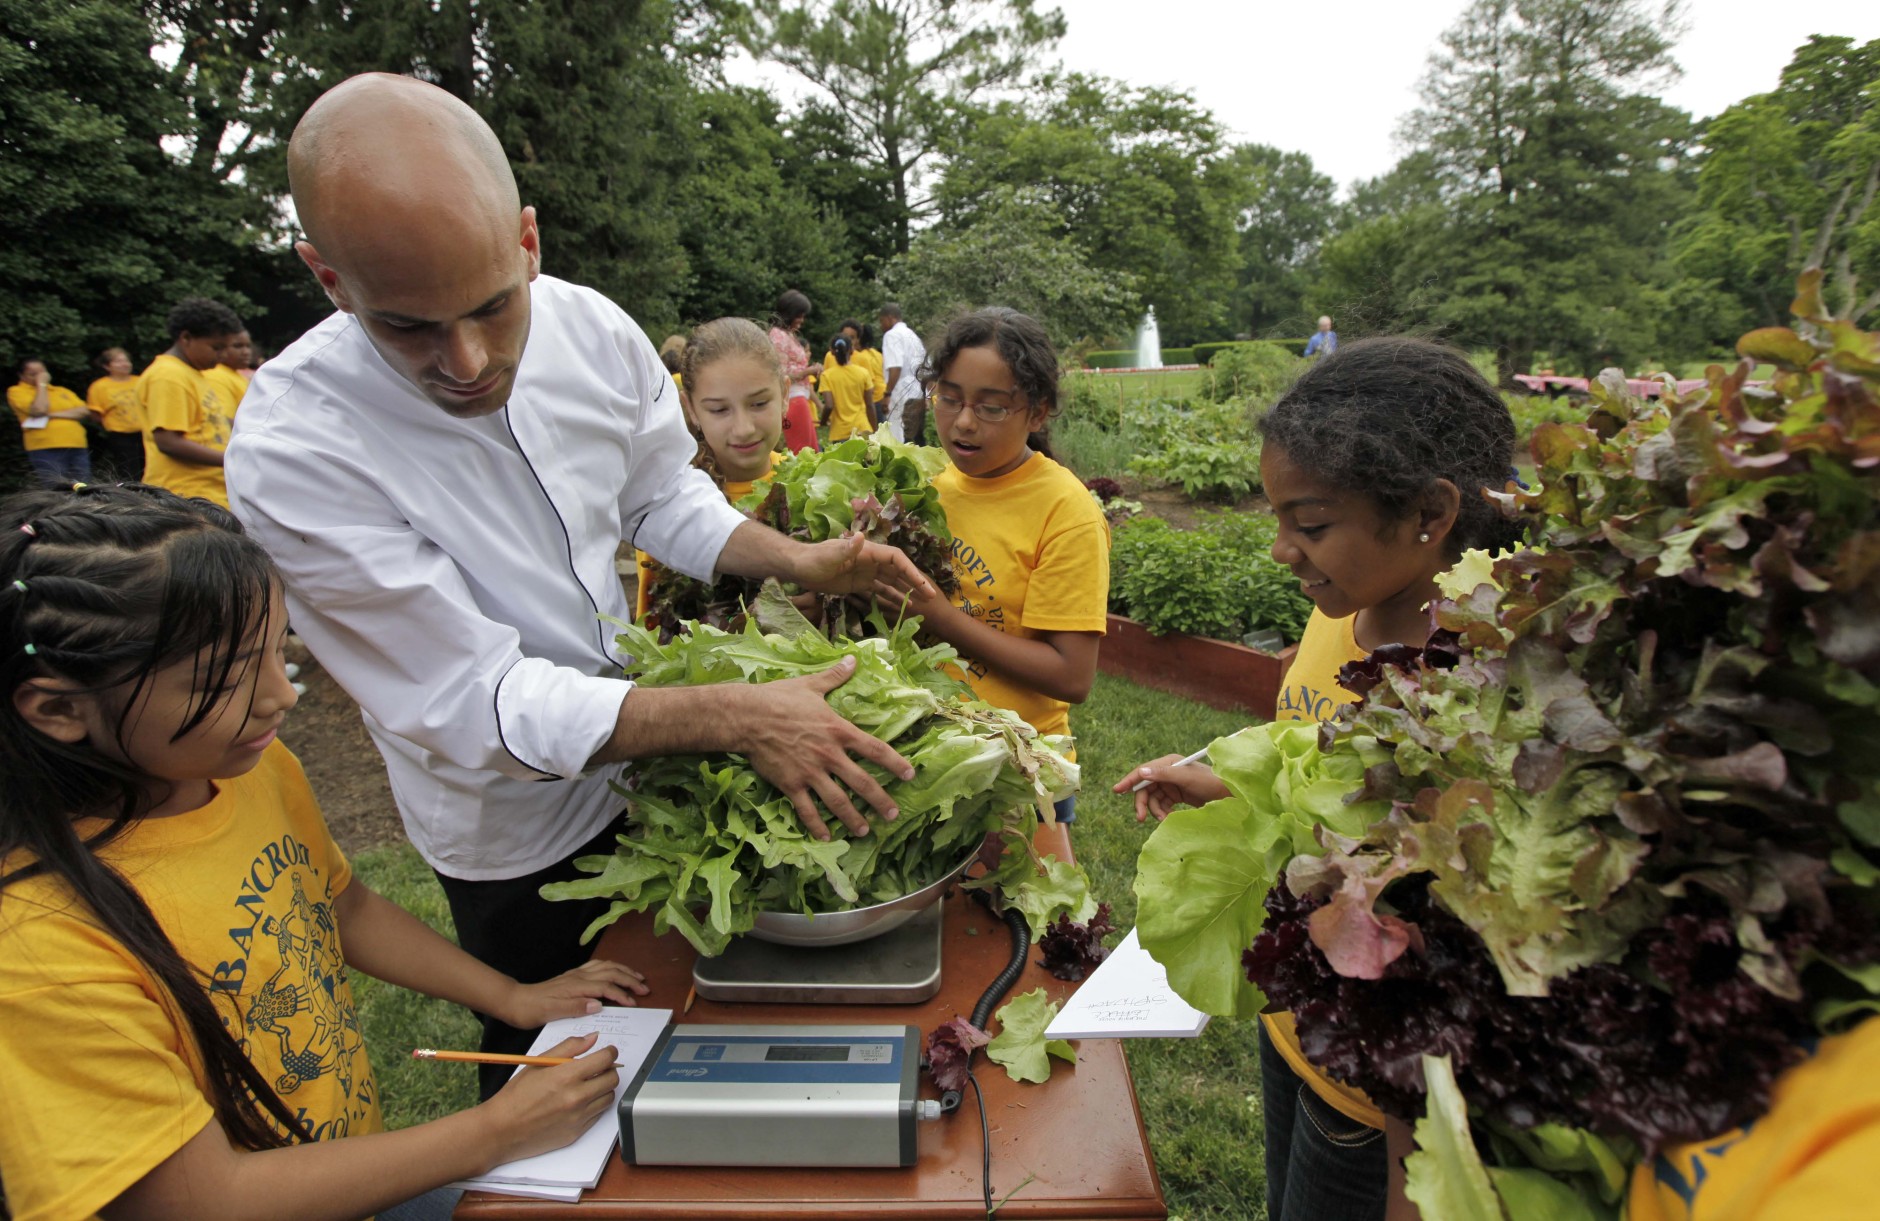 Fifth graders from Bancroft Elementary School and assistant White House Chef Sam Kass weigh some of the lettuce that they and first lady Michelle Obama harvested some of the vegetables that they planted in a garden on the South Lawn of the White House in Washington, Tuesday, June 16, 2009.(AP Photo/Alex Brandon)